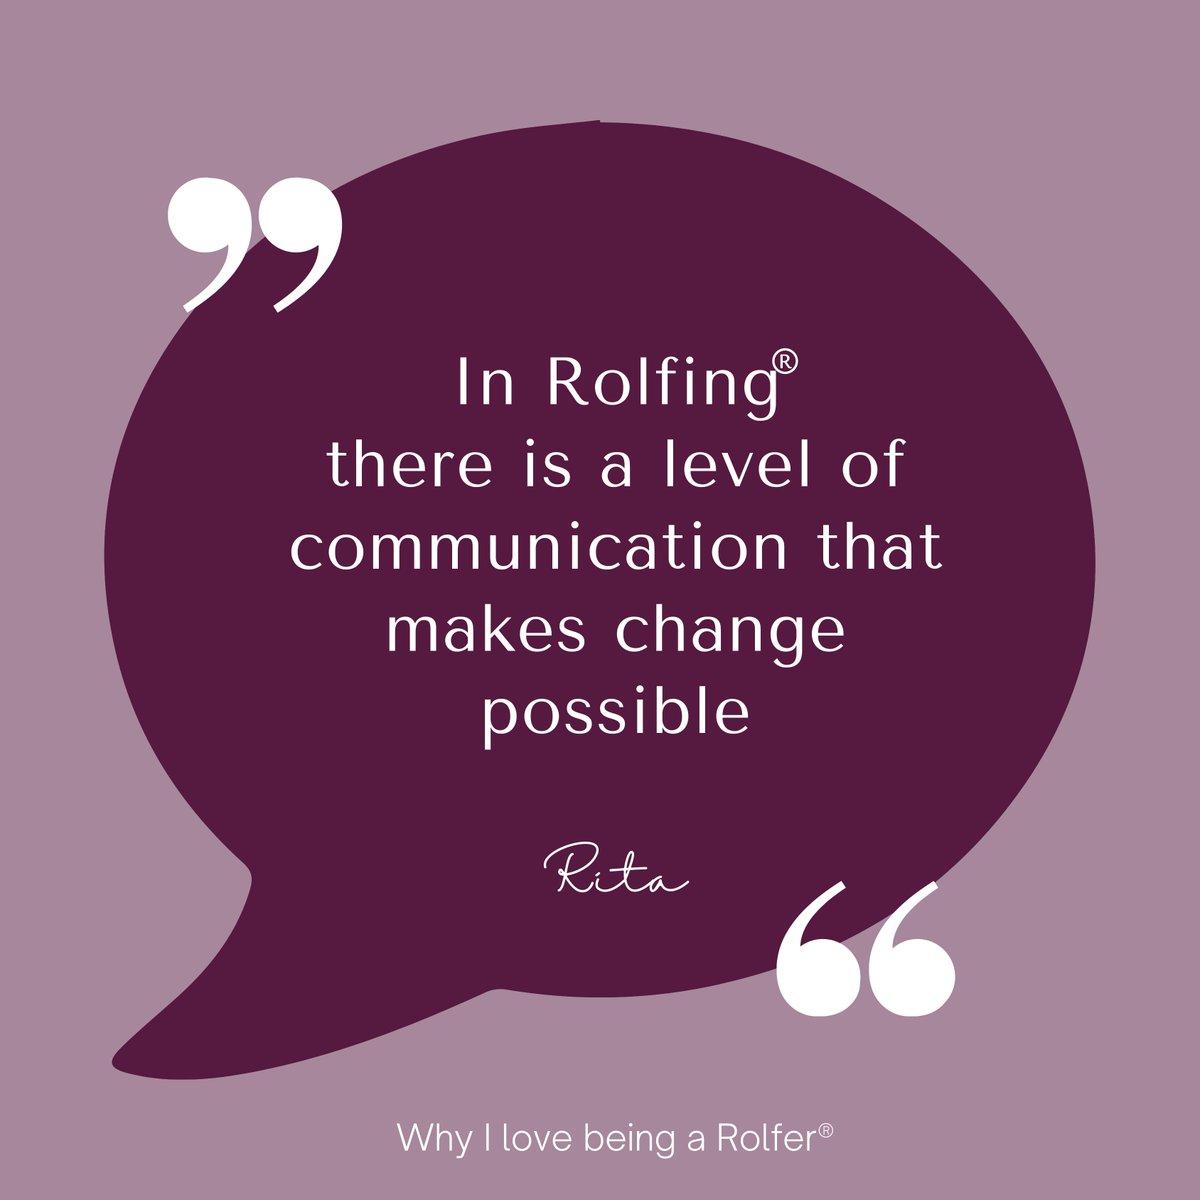 Why I love being a Rolfer - Rita

#rolfing #rolfer #structuralintegration #myofascialrelease #fascia #selfcare
#holisticapproach #sustainablehealth #RolfMovement #movement #BodyAwareness #expressyourself